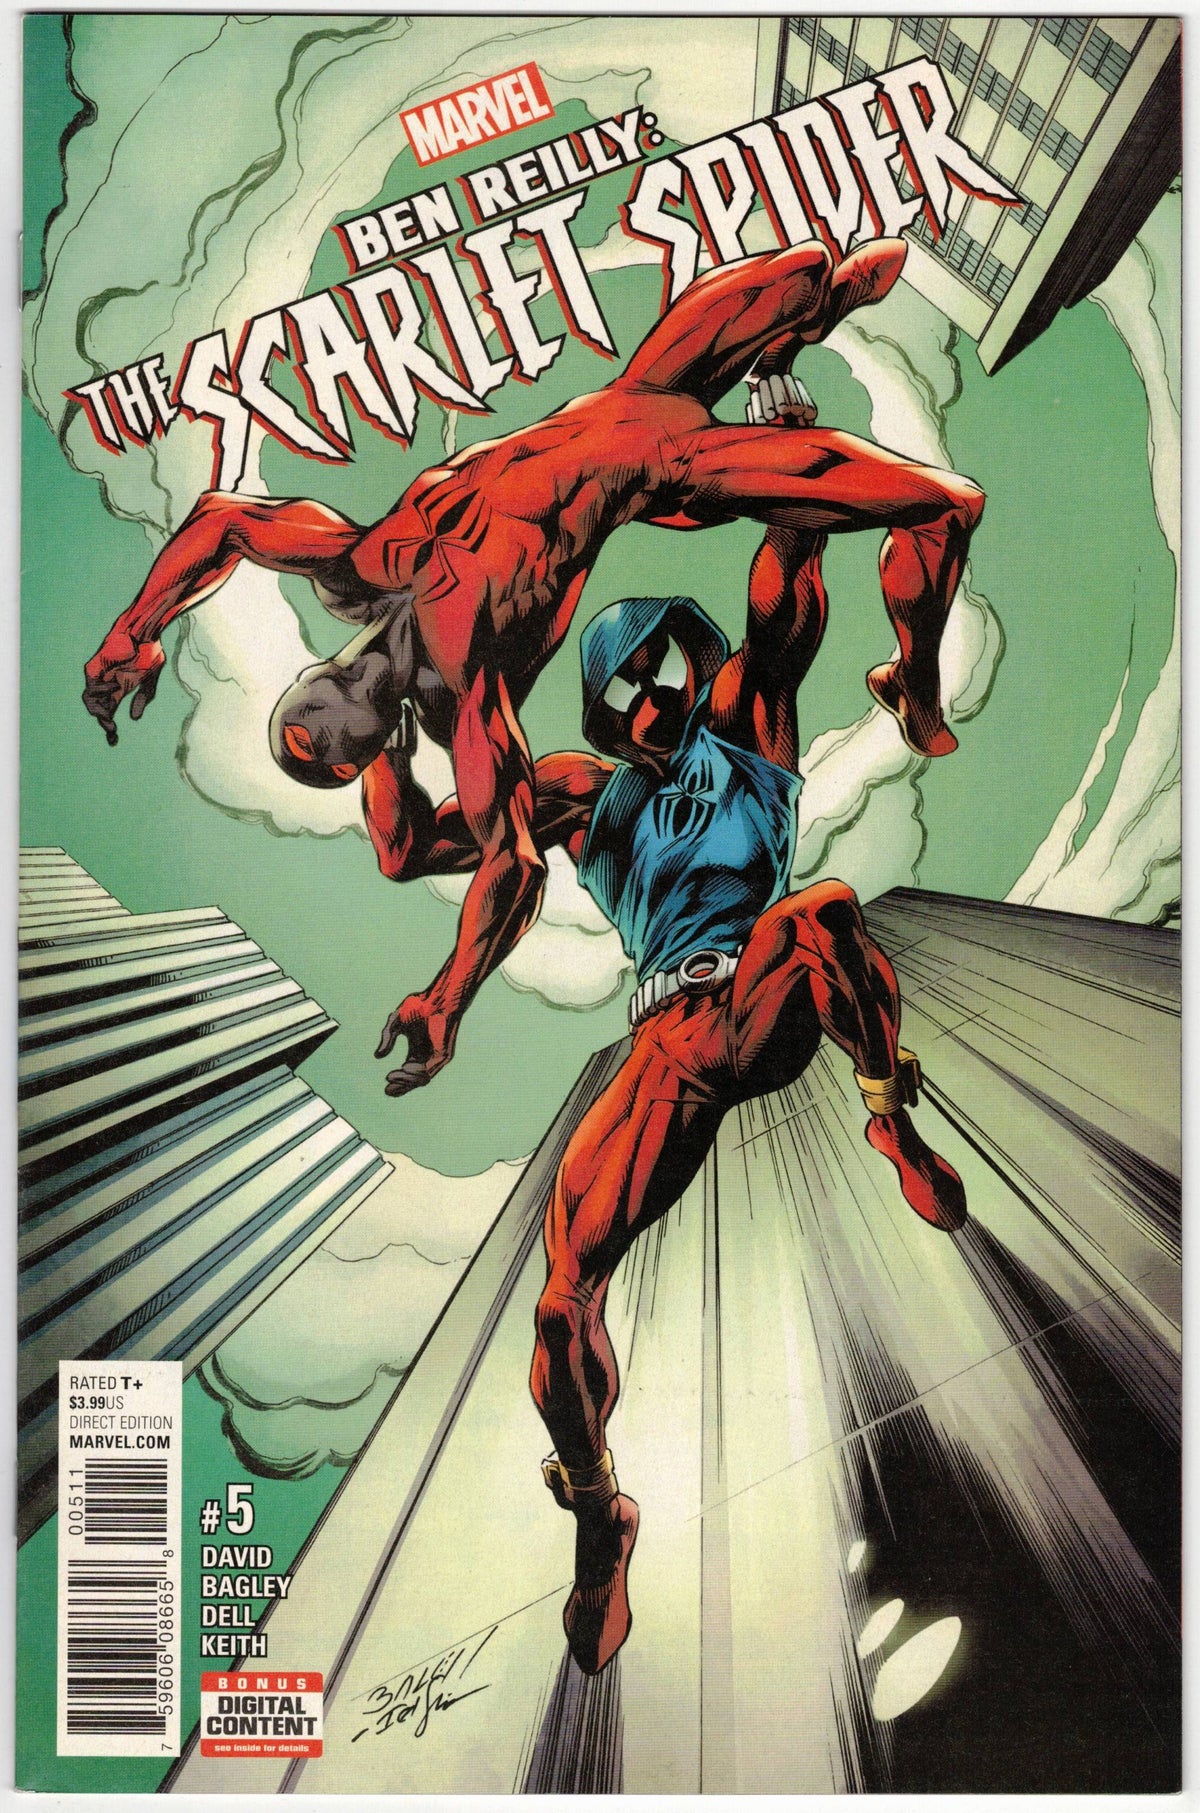 Photo of Ben Reilly: The Scarlet Spider (2017) Issue 5 - Near Mint Comic sold by Stronghold Collectibles